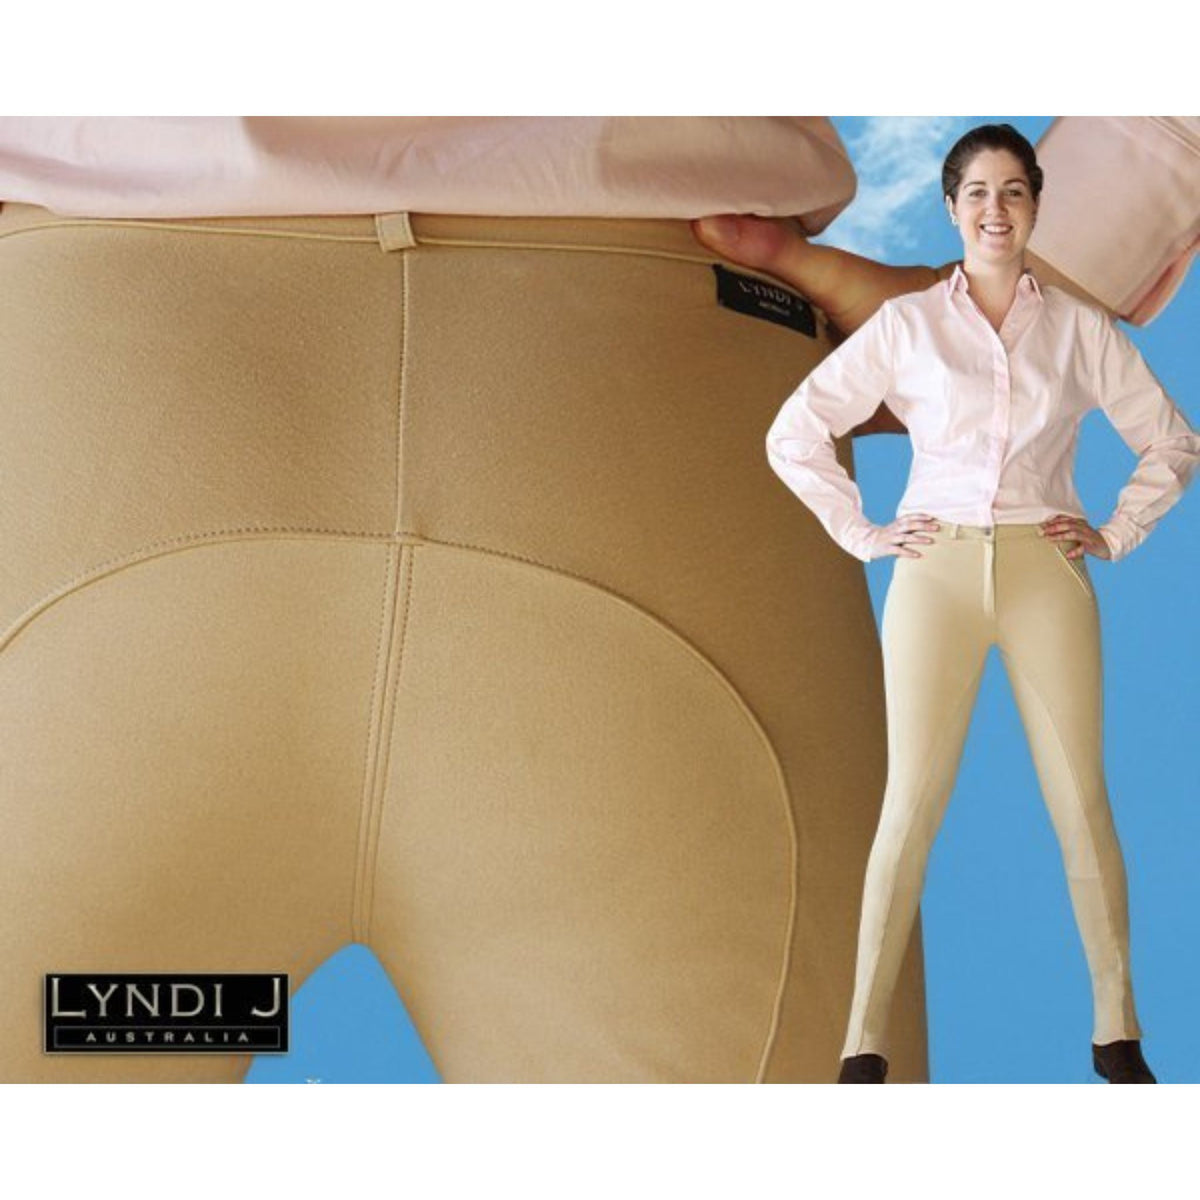 Lady wearing beige jodhpurs with image of grip seat as background.